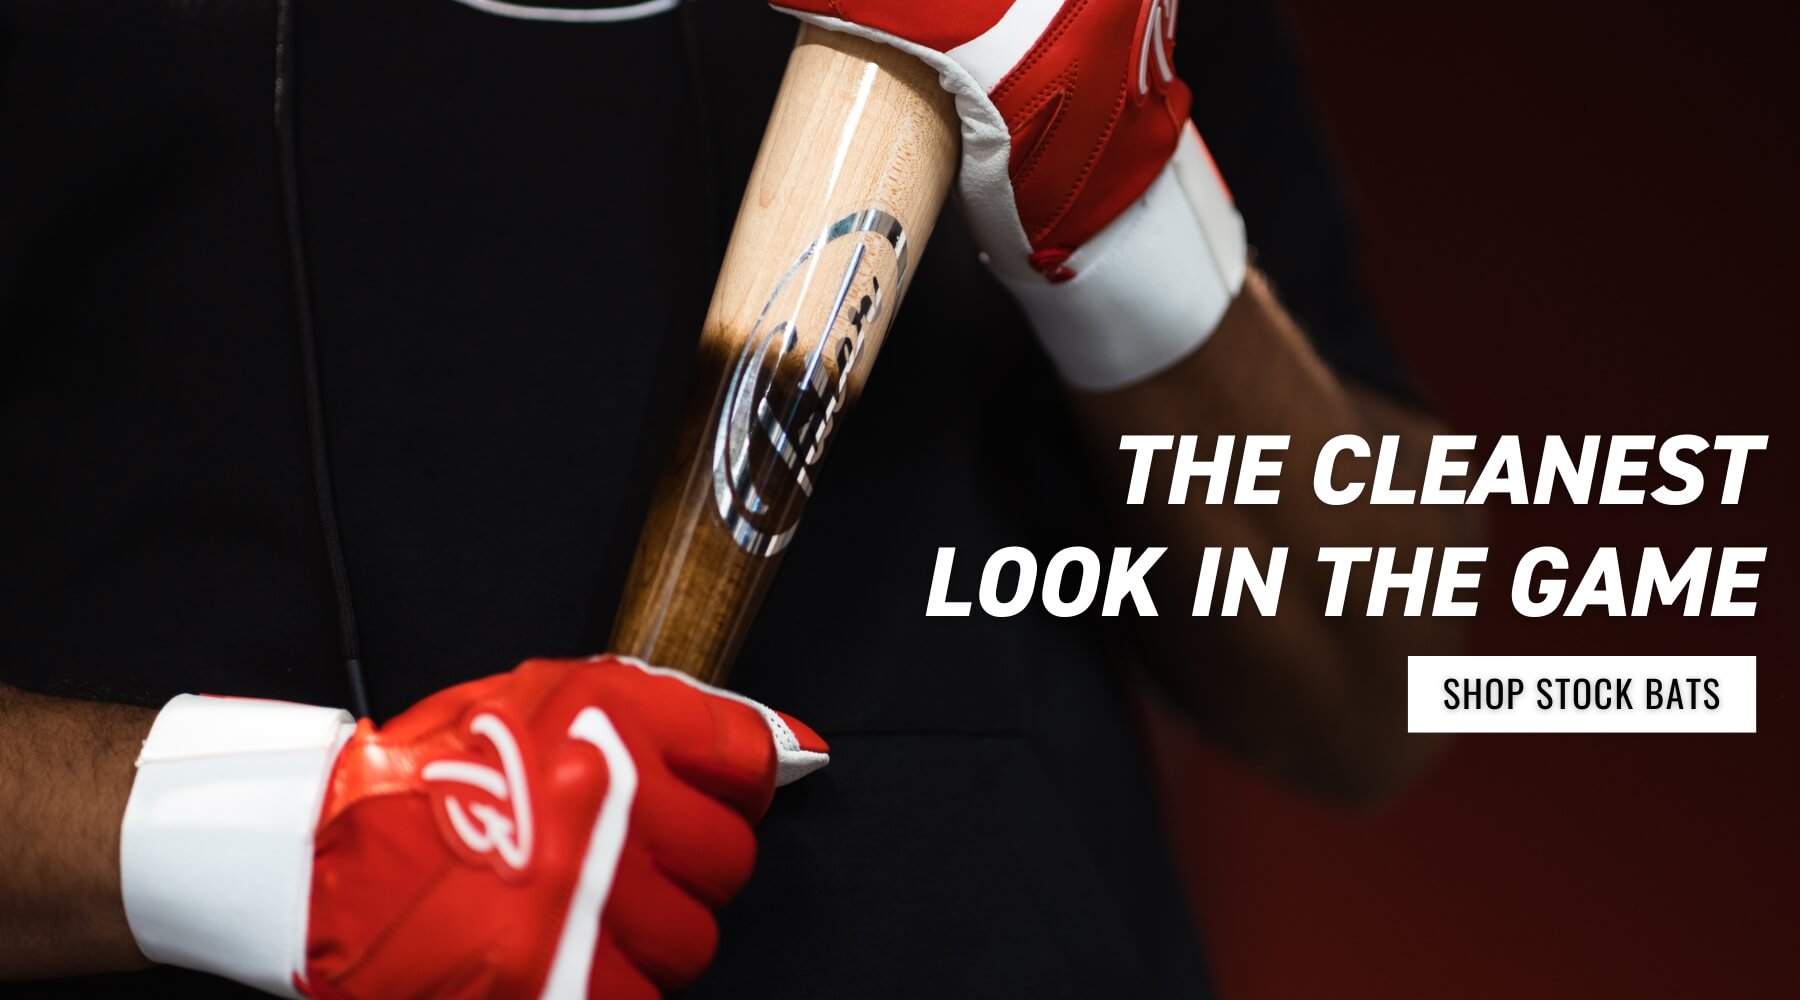 A close-up of a baseball player holding a pine tar bat with a clear focus on the Tater logo. The player wears red and white batting gloves.